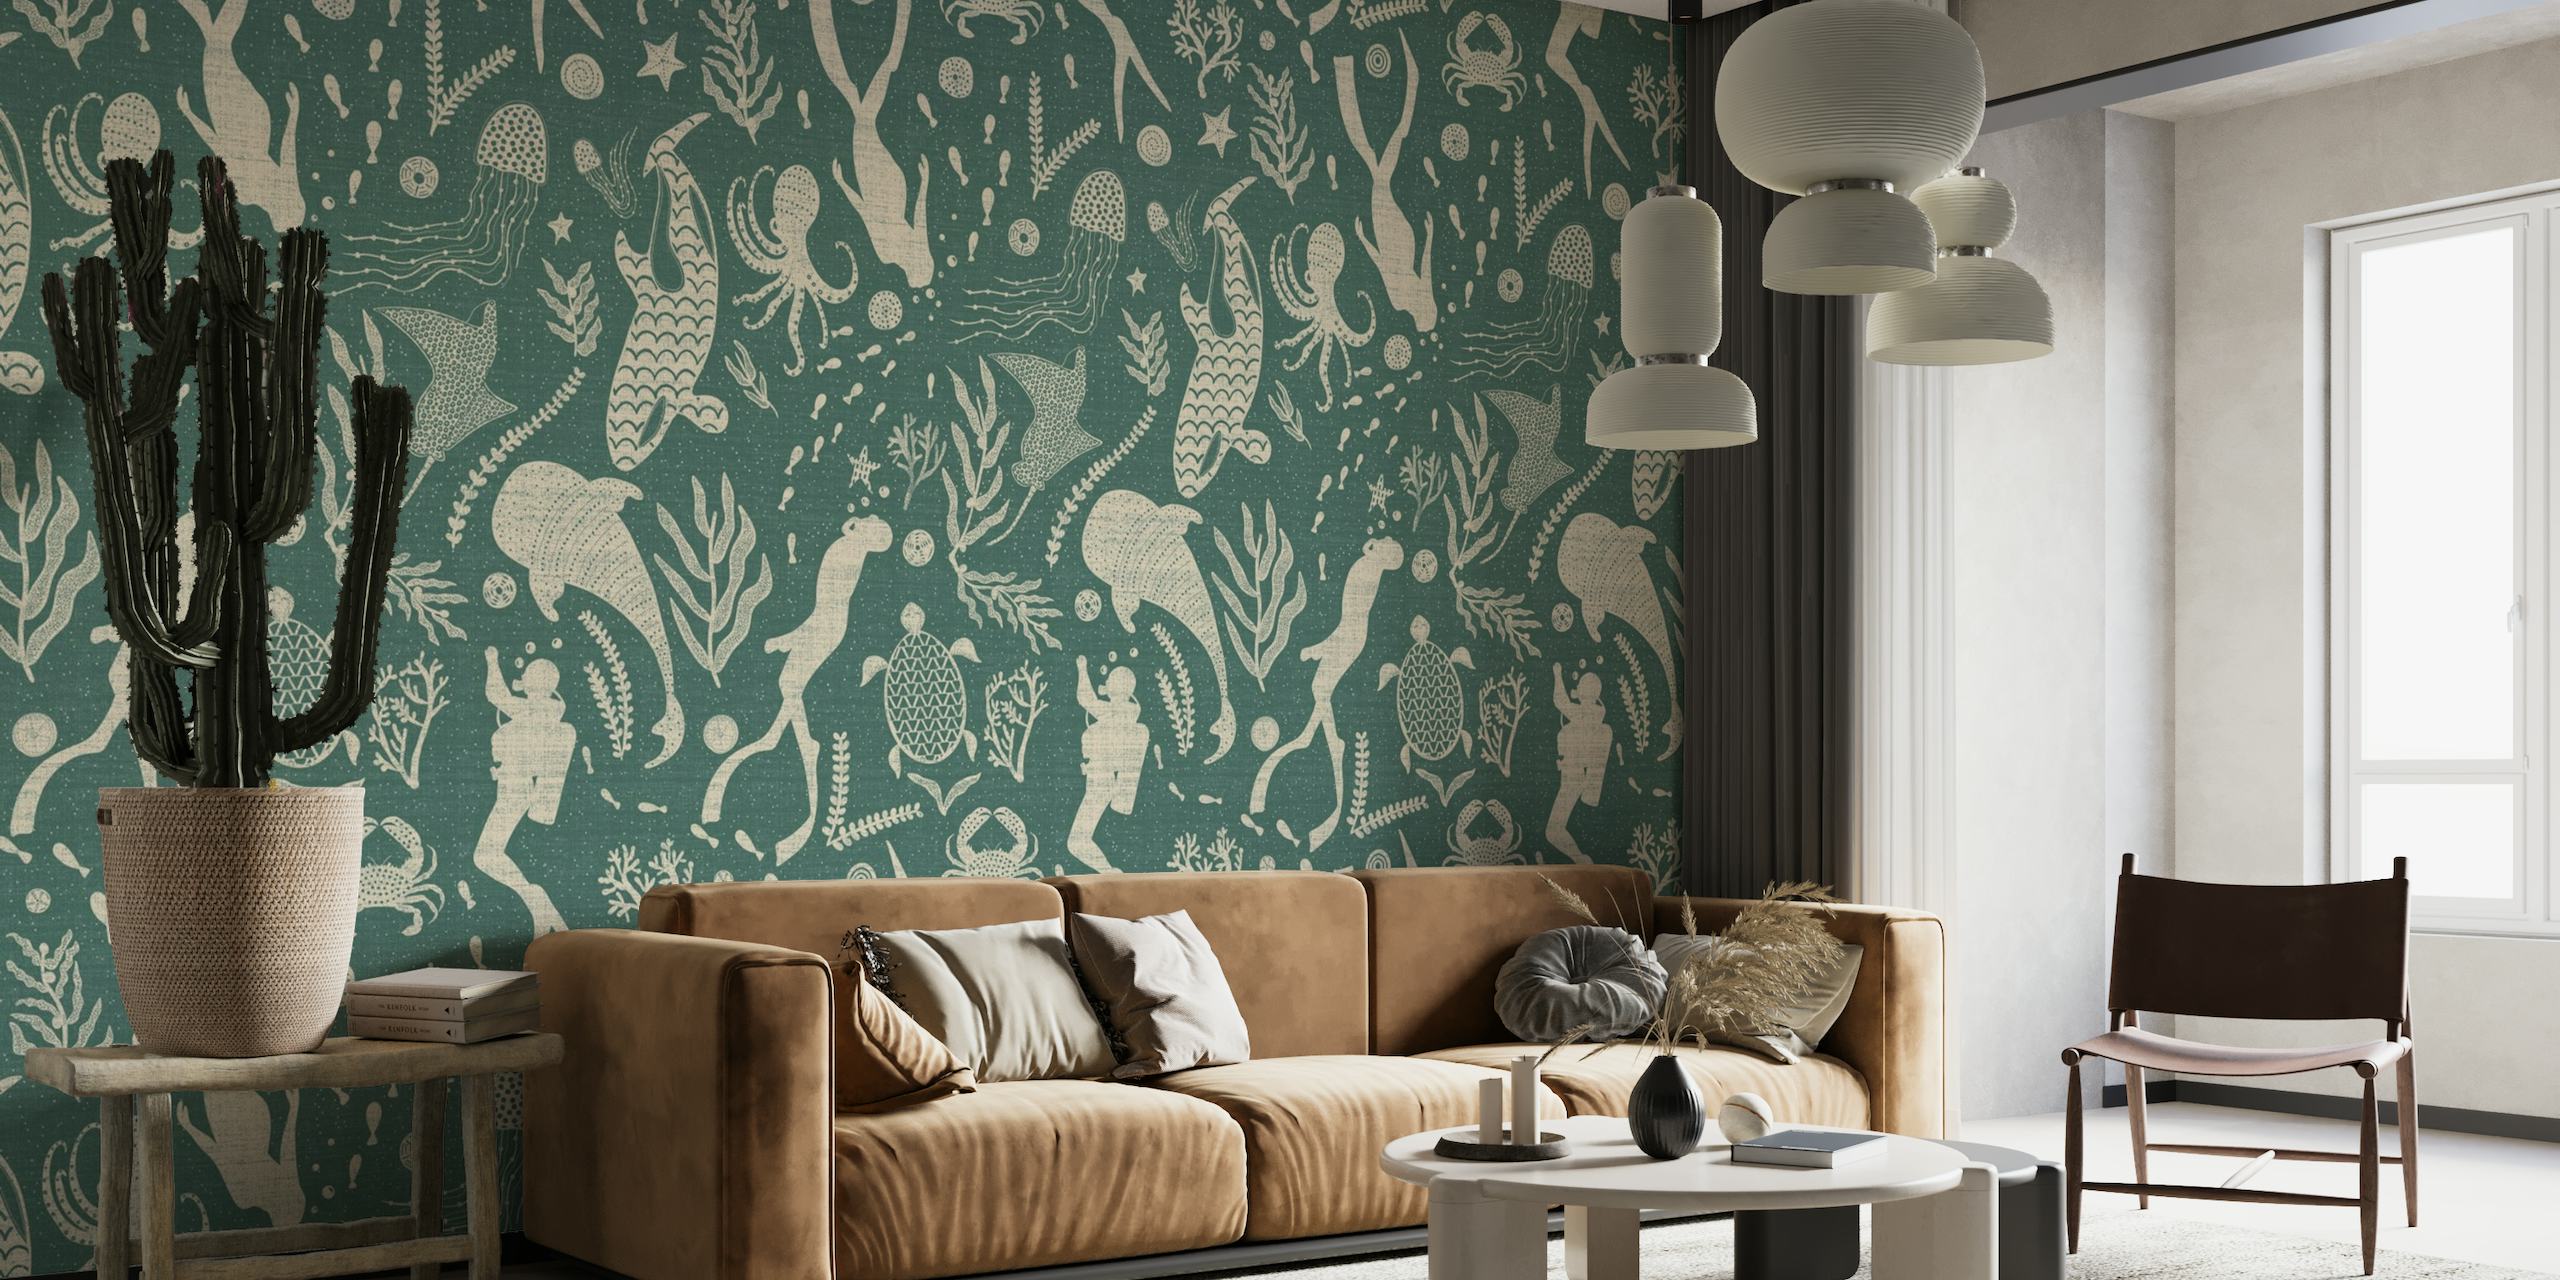 Scuba Toile Teal Wall Mural with Ocean Life Patterns